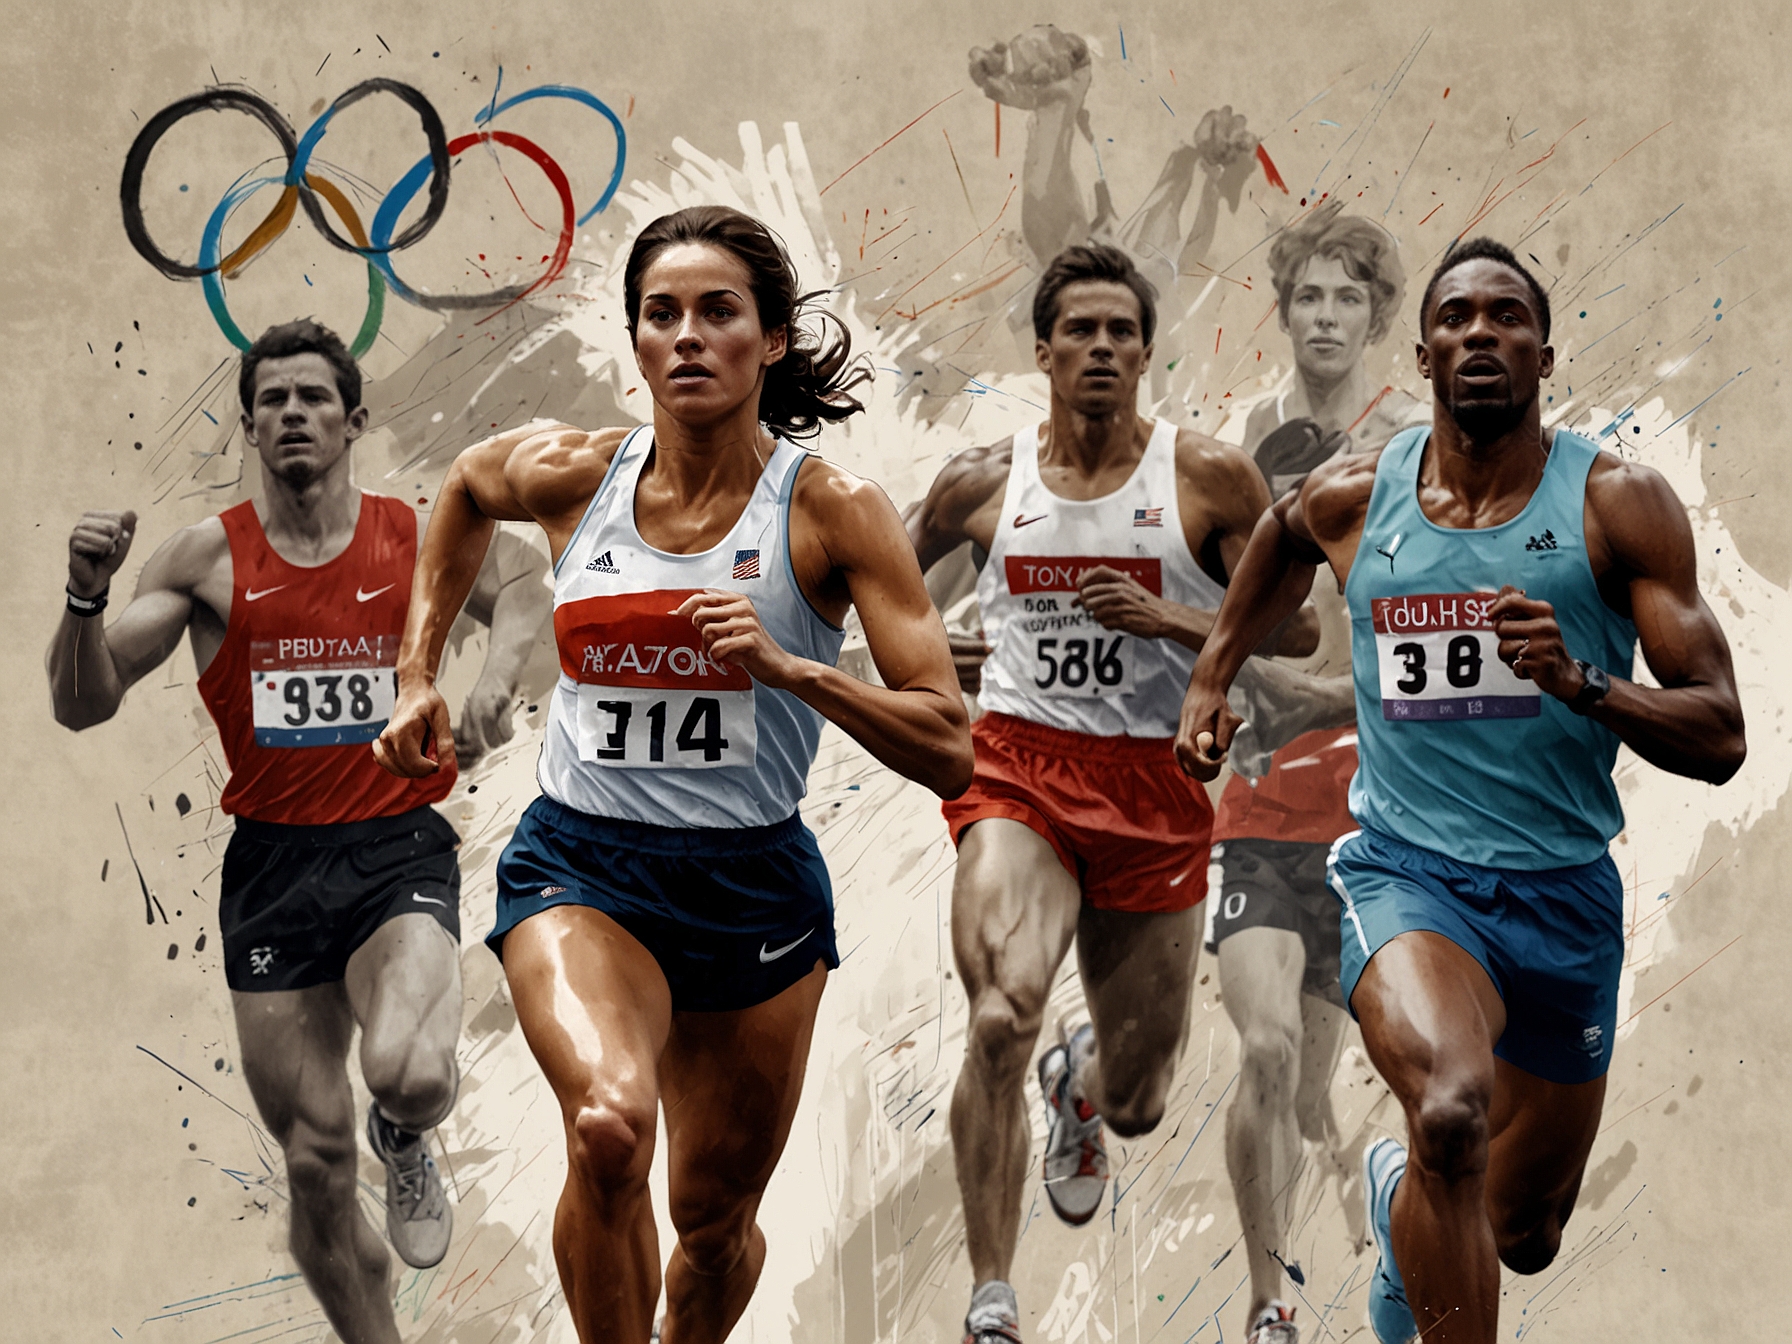 Olympic athletes competing, highlighting the enormous dedication and effort they put into their sport, while facing significant financial challenges off the field.